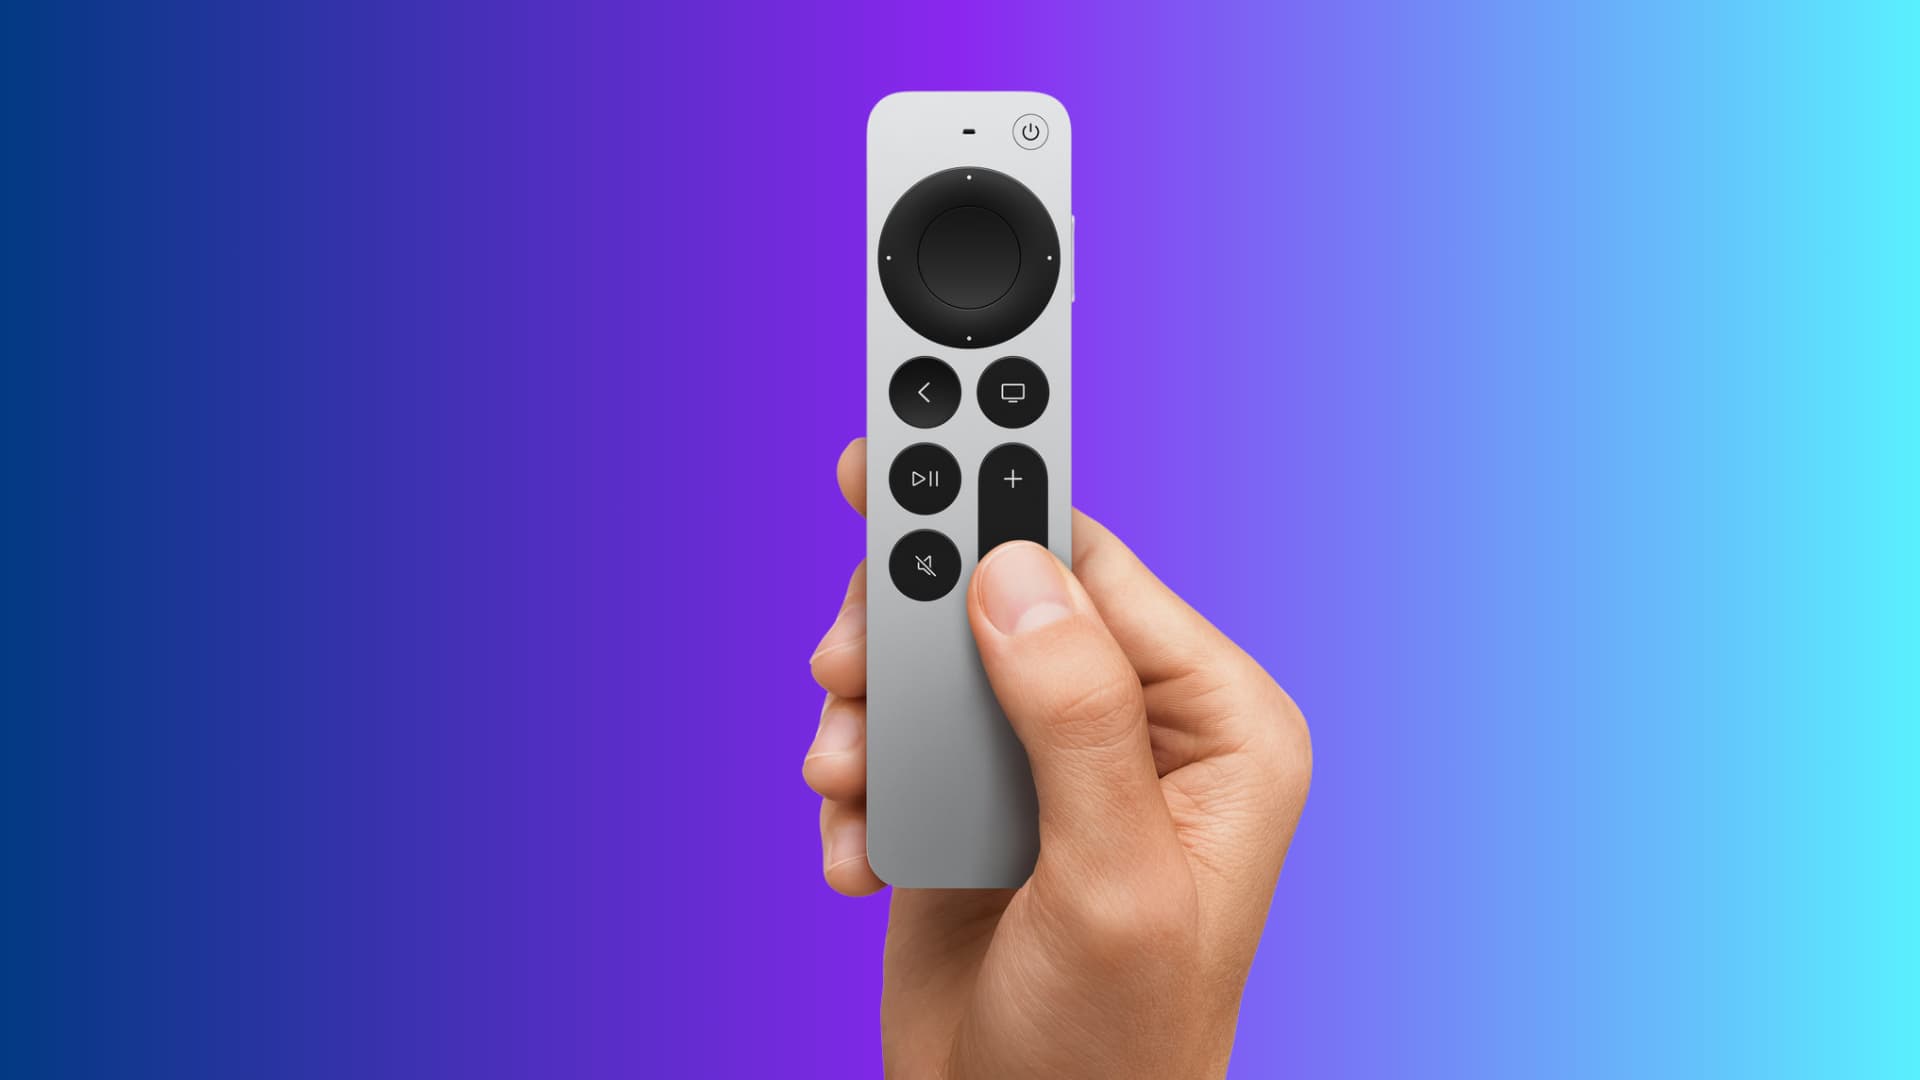 How to find a lost or misplaced Siri Remote with your iPhone